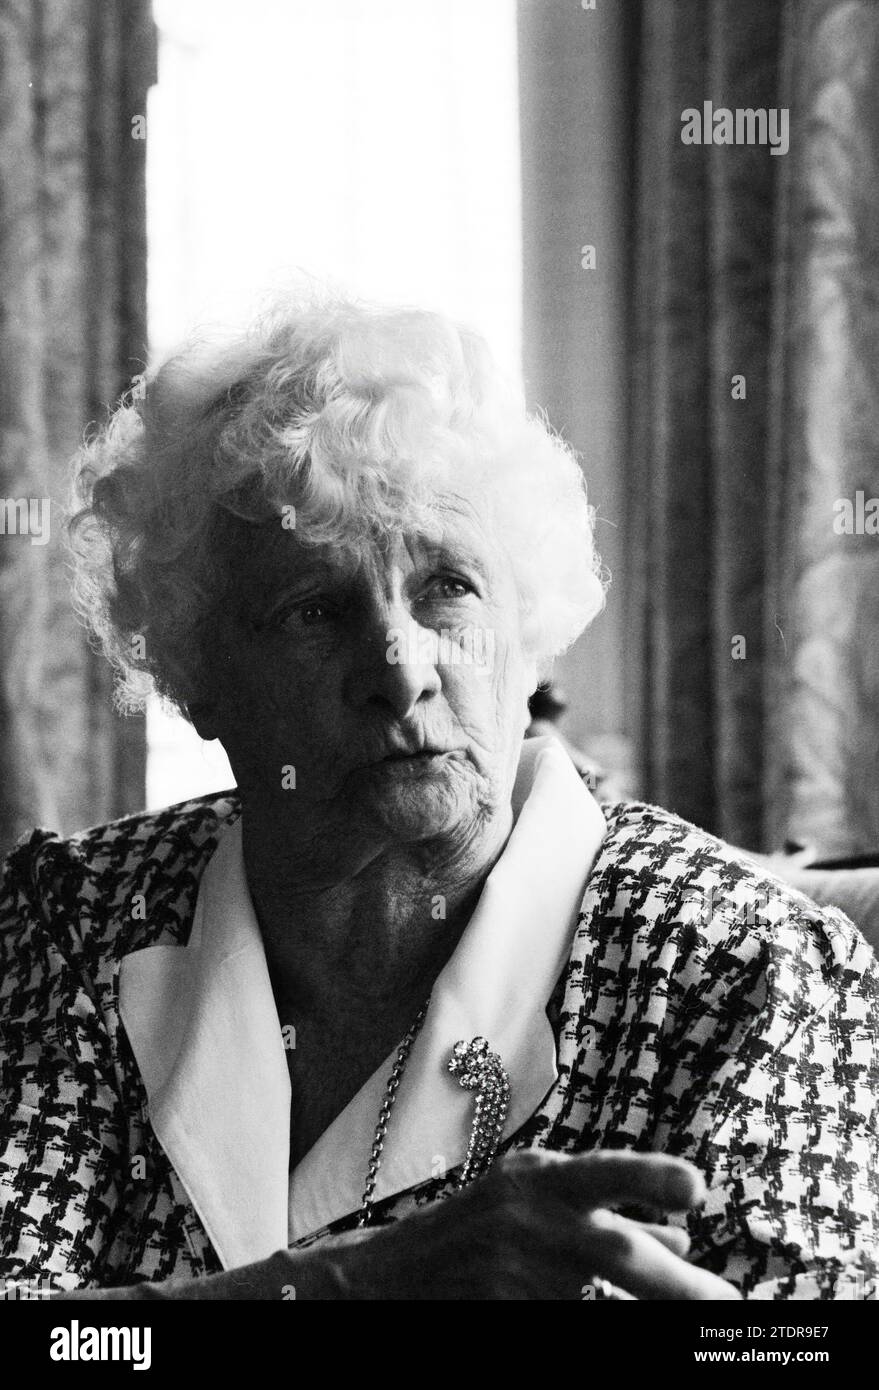 Sister v.d. Hit, Haarlem, The Netherlands, 28-11-1994, Whizgle News from the Past, Tailored for the Future. Explore historical narratives, Dutch The Netherlands agency image with a modern perspective, bridging the gap between yesterday's events and tomorrow's insights. A timeless journey shaping the stories that shape our future Stock Photo